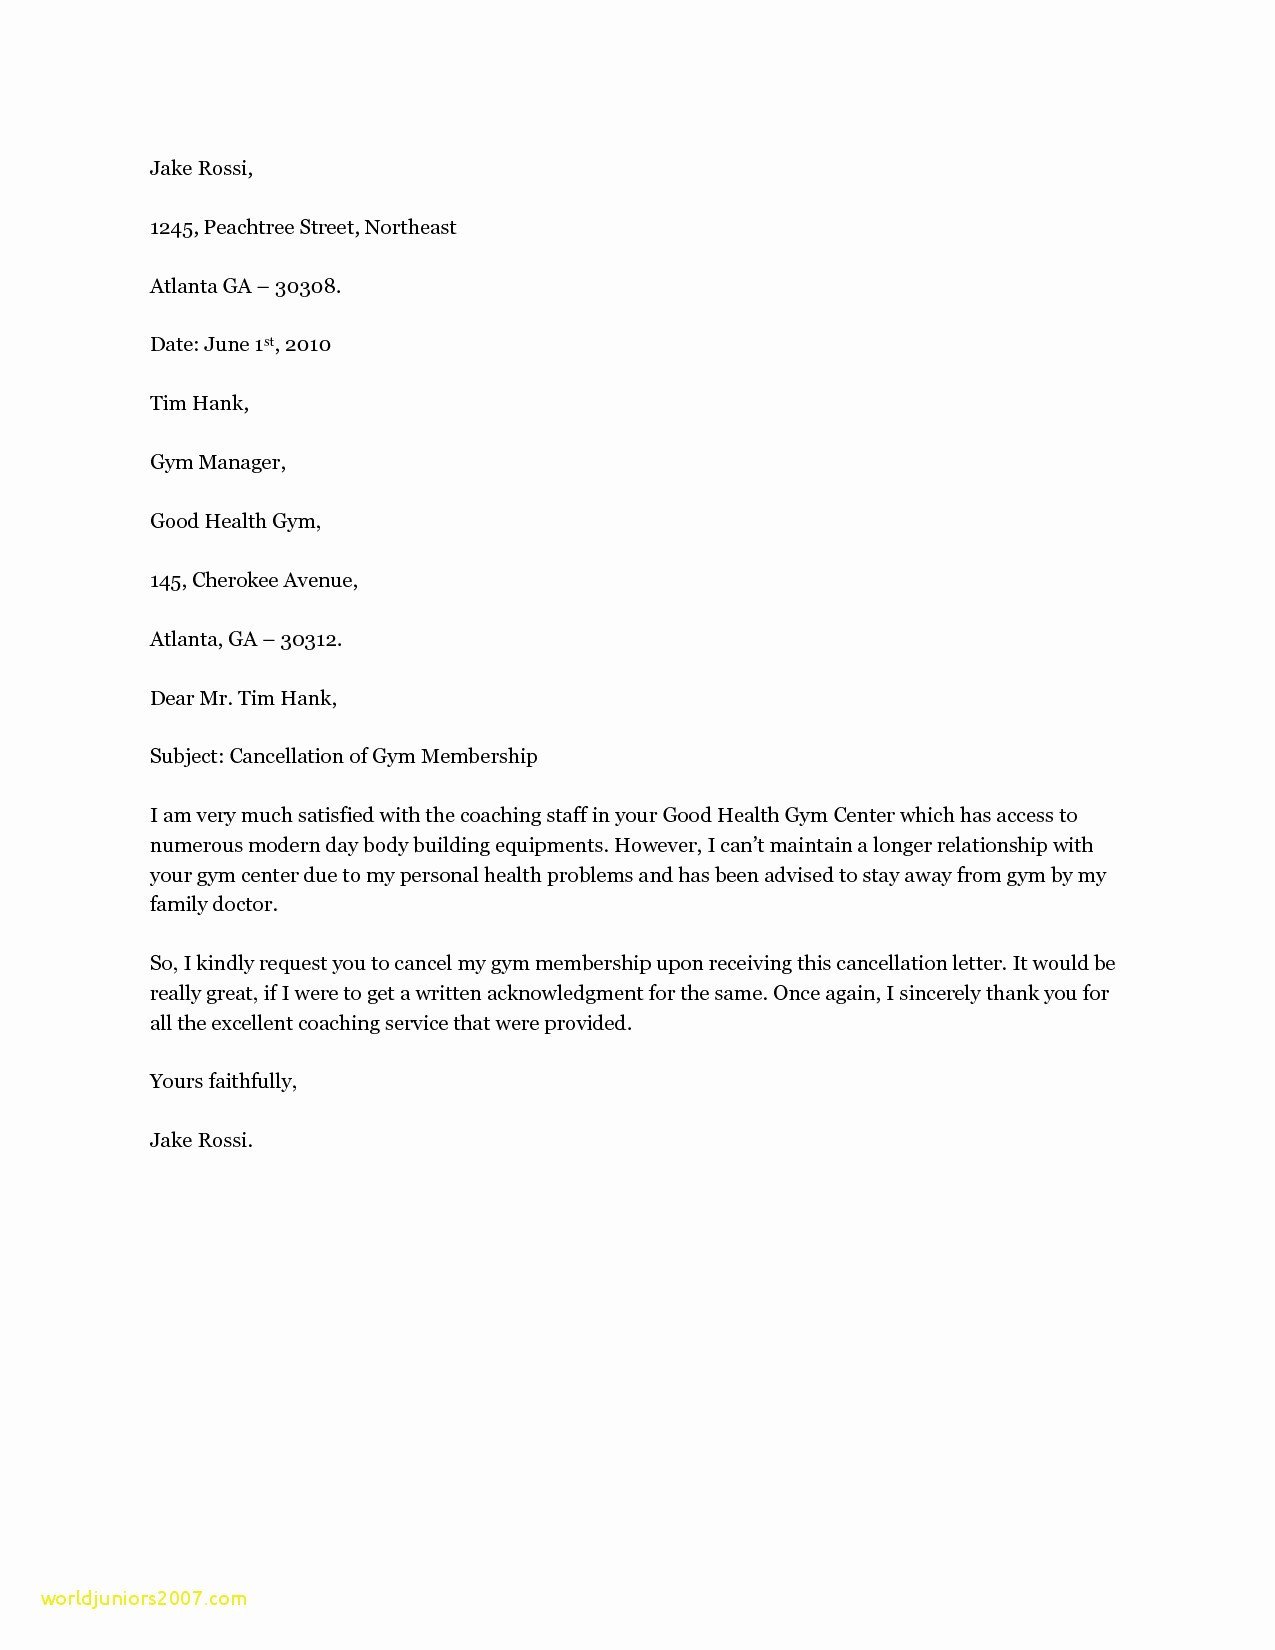 Gym Membership Cancellation Letter Examples Daily Roabox